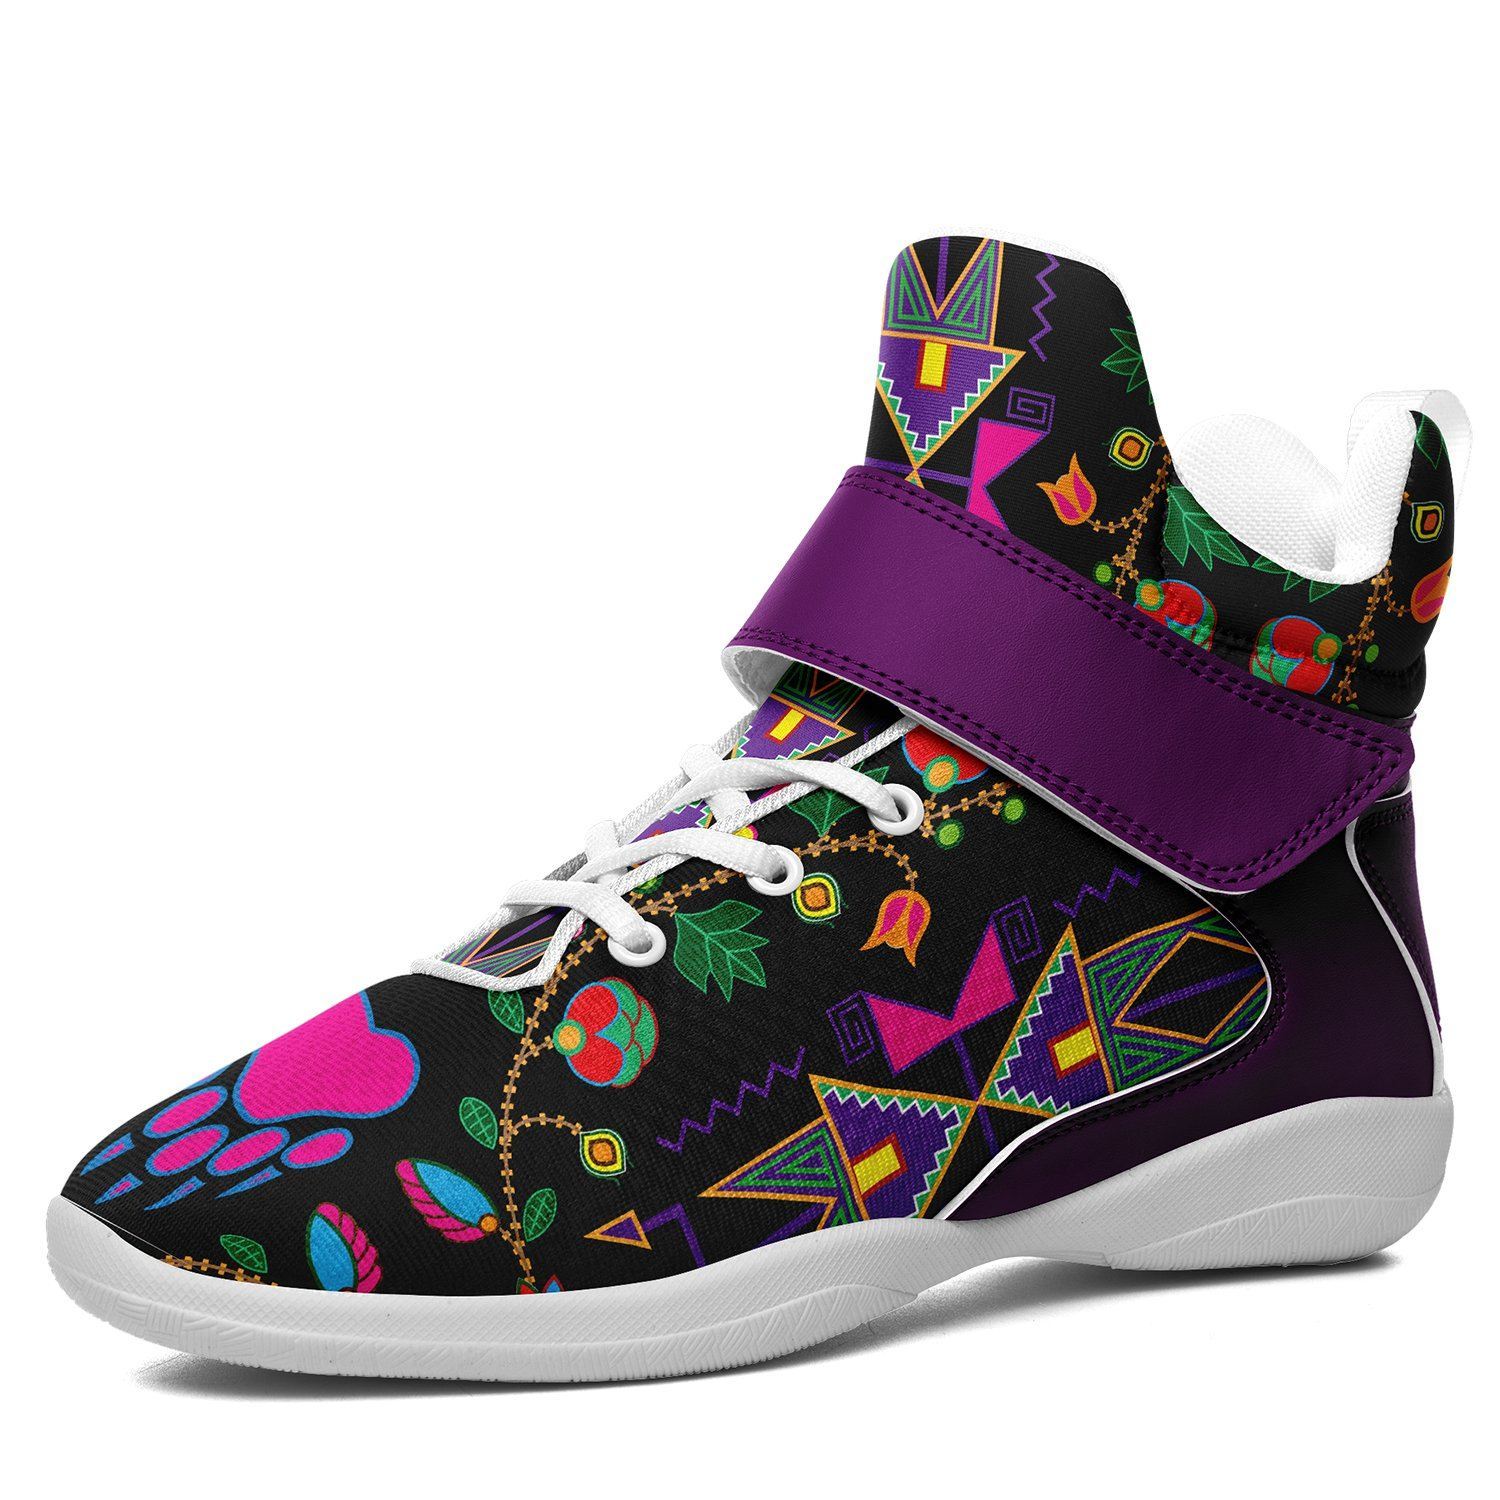 Geometric Floral Fall Black Kid's Ipottaa Basketball / Sport High Top Shoes 49 Dzine US Women 4.5 / US Youth 3.5 / EUR 35 White Sole with Indigo Strap 